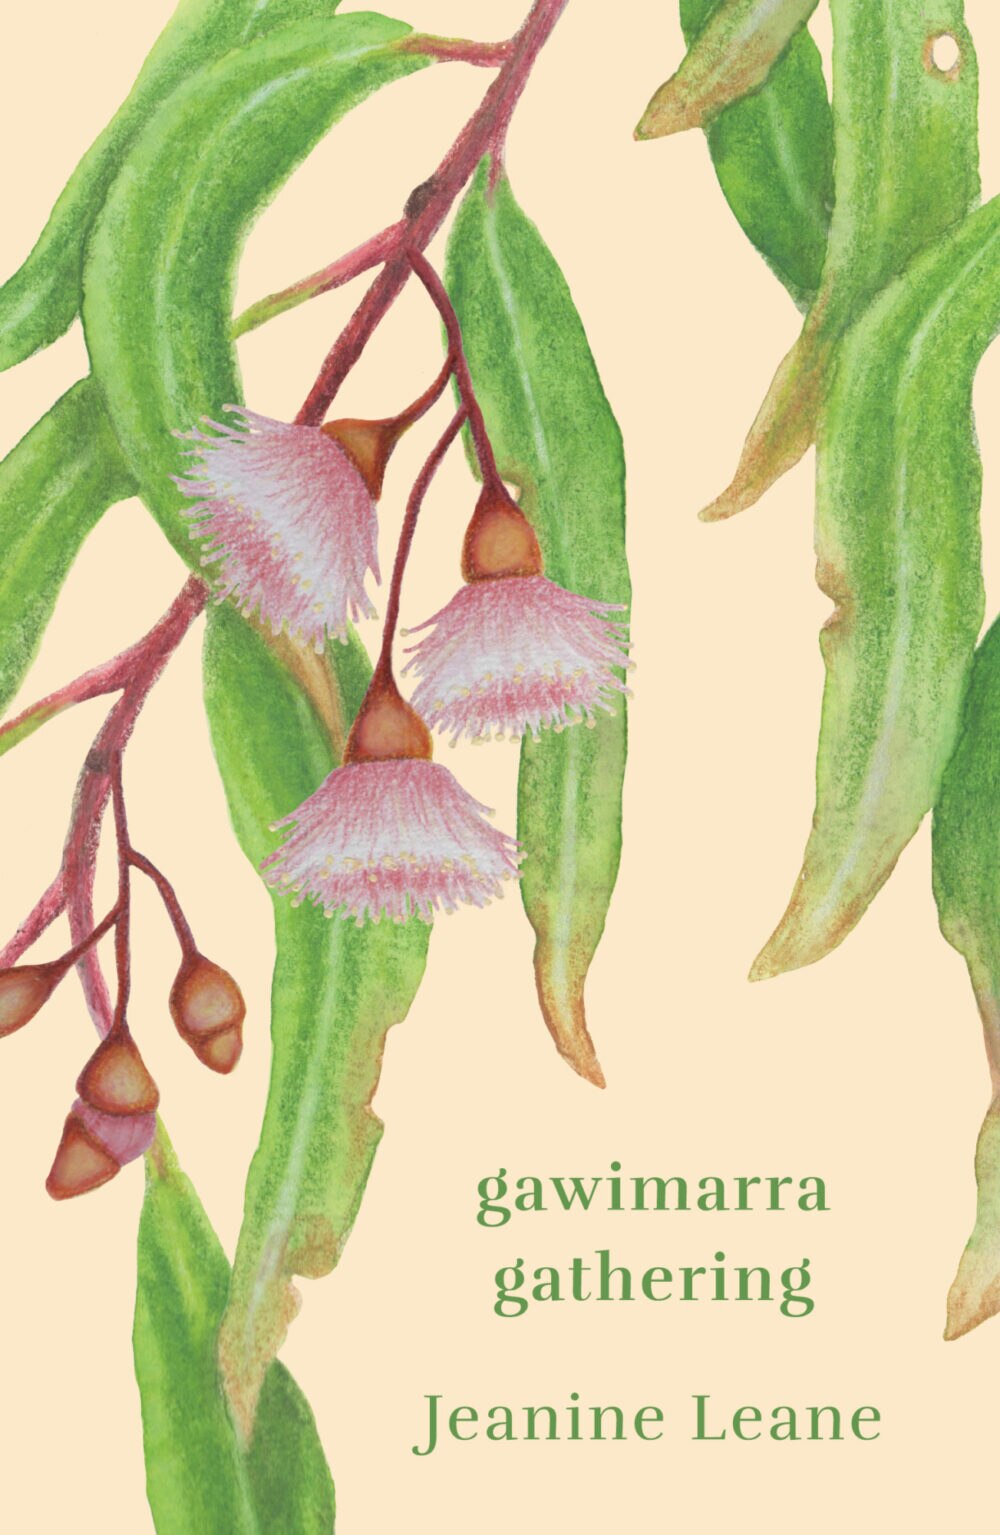 A book cover showing an illustration of hanging green gum leaves and three pink blossoms